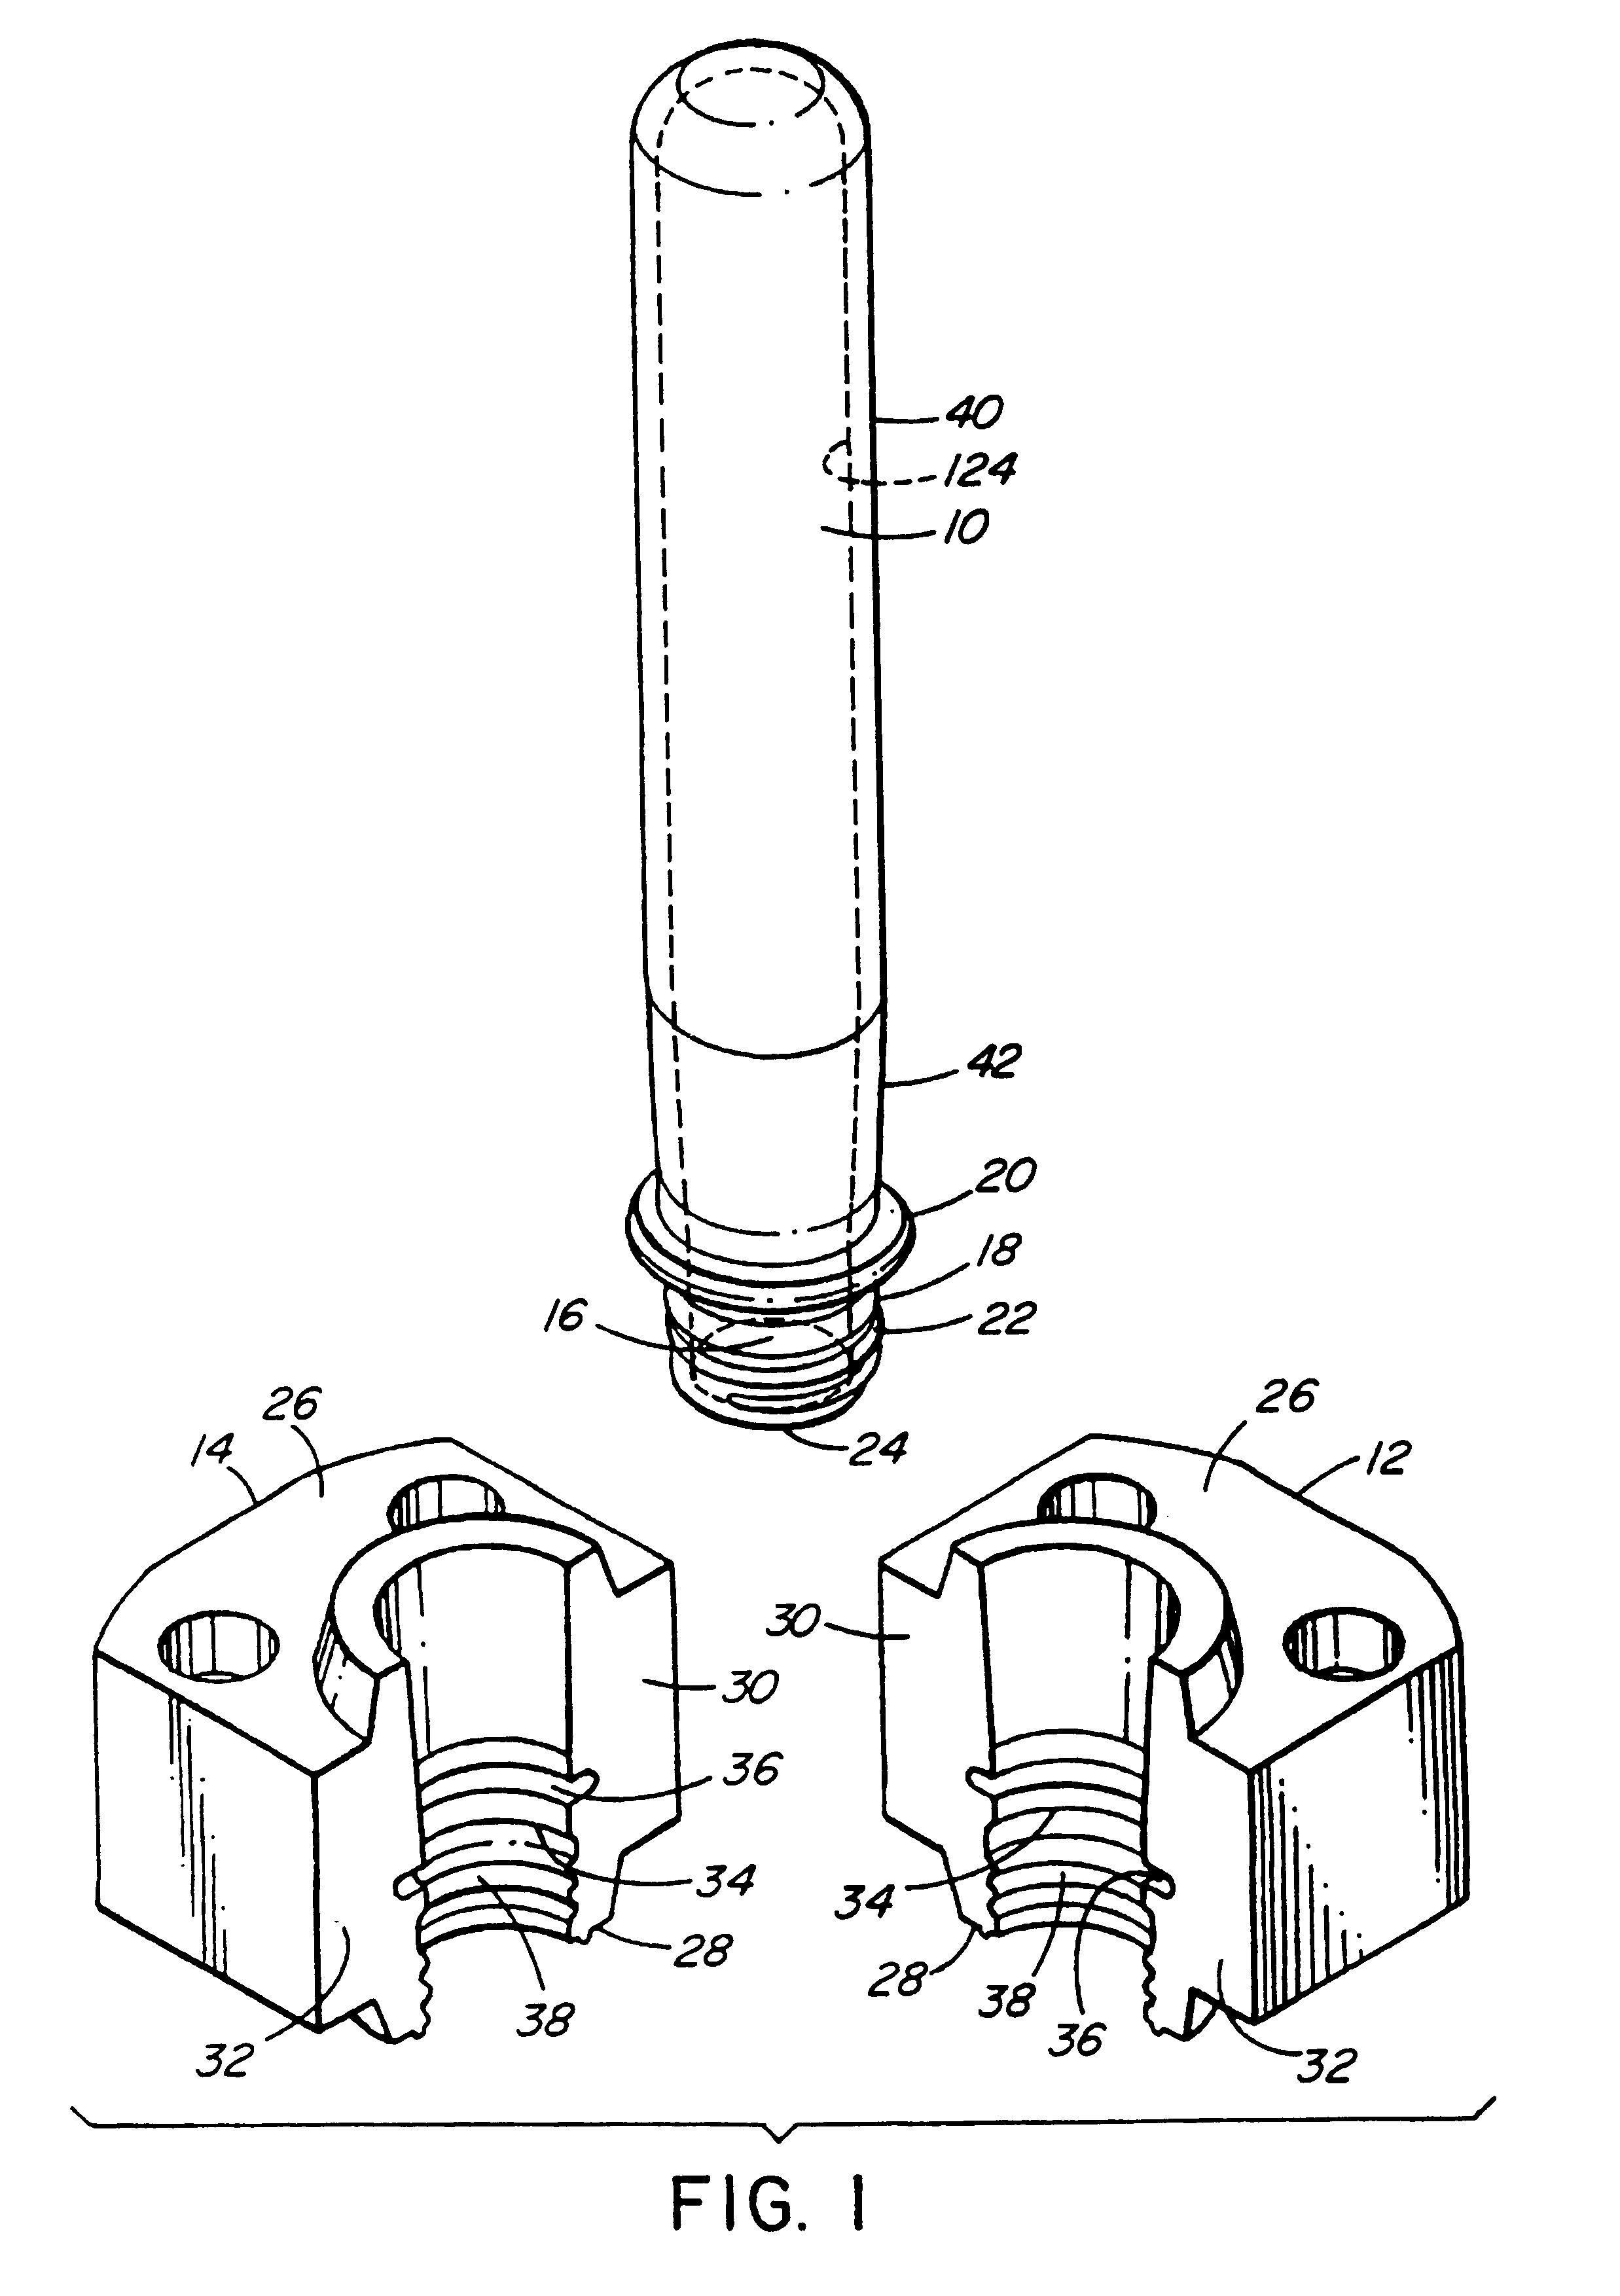 Method of making injection molding cooled thread split inserts